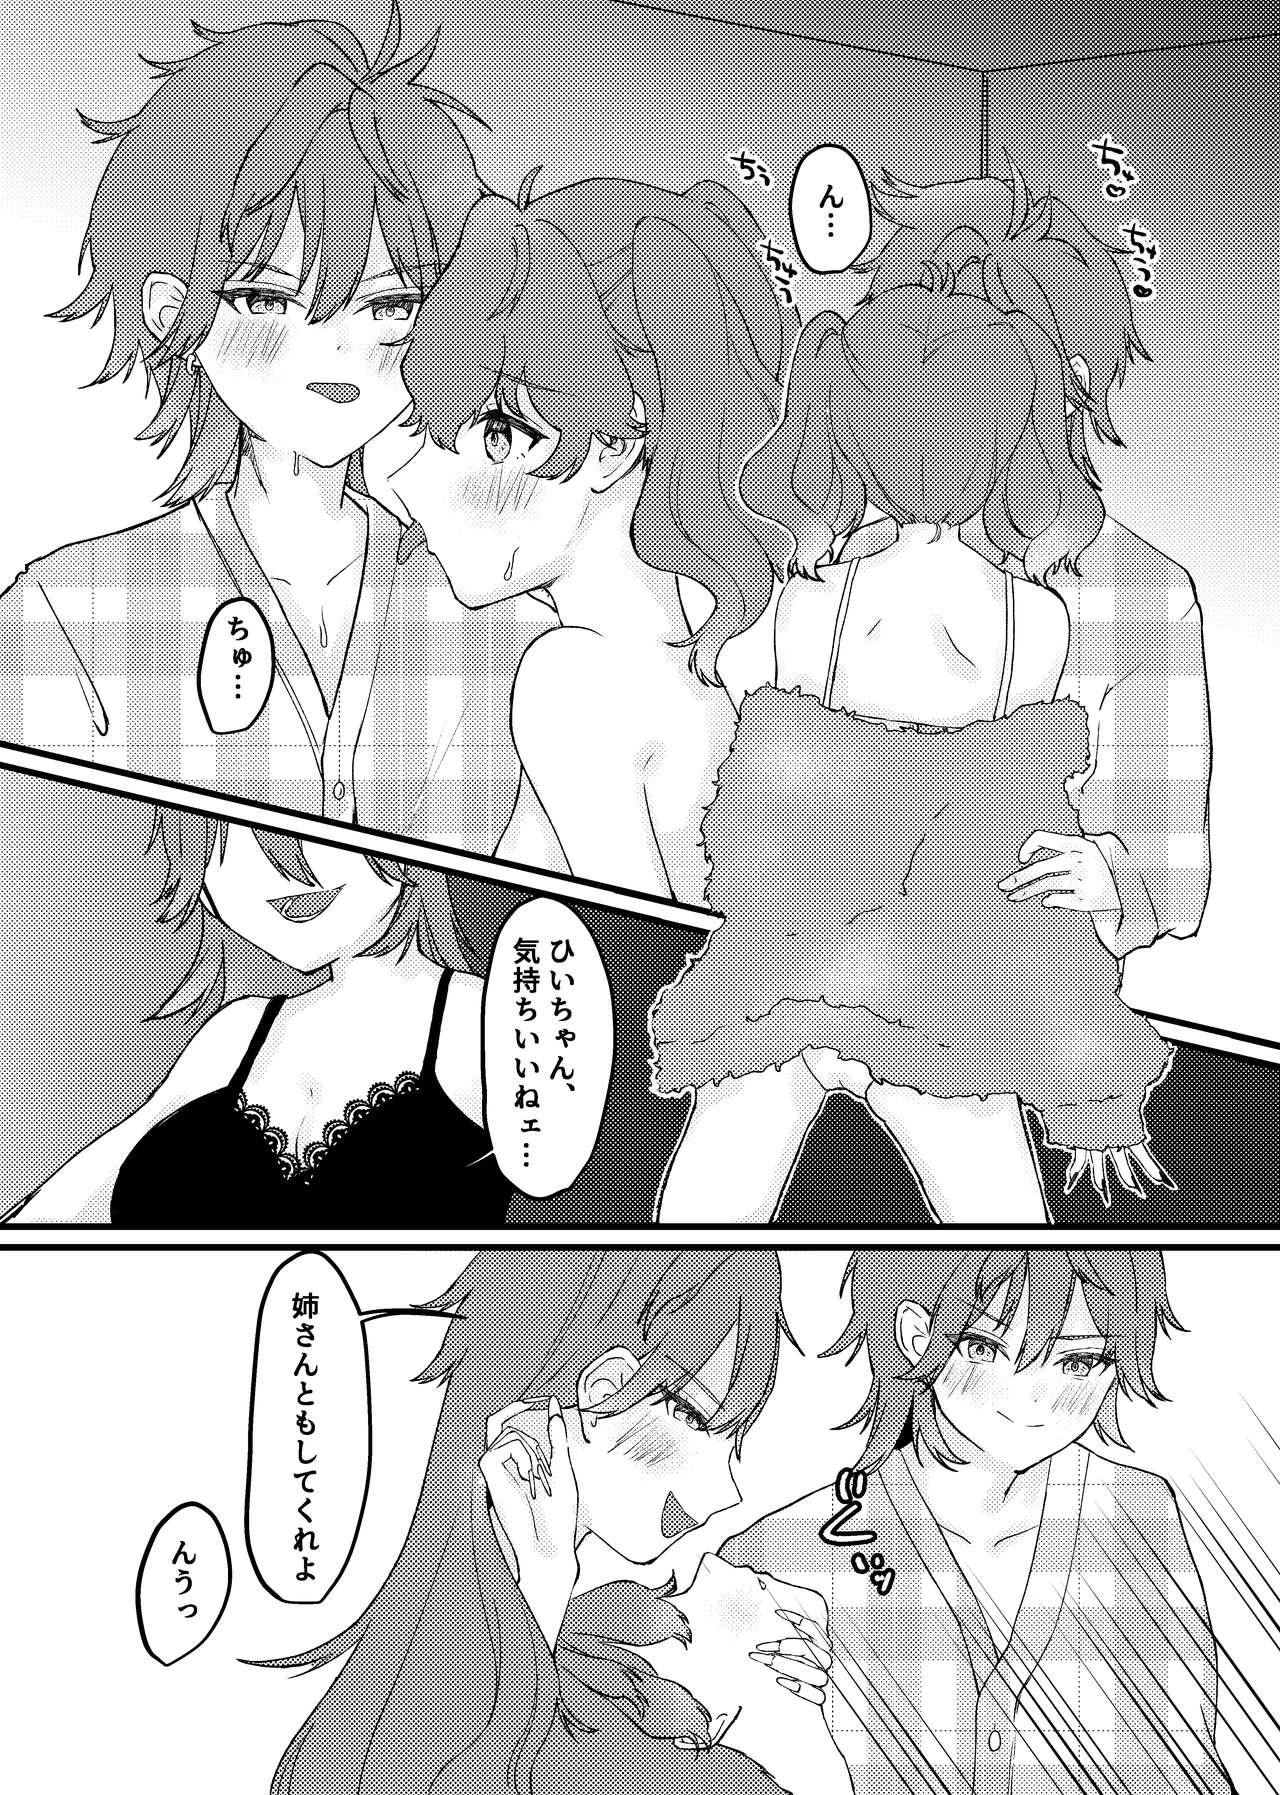 Fucked Hard 燐燐♀一♀ - Ensemble stars Eating Pussy - Page 2